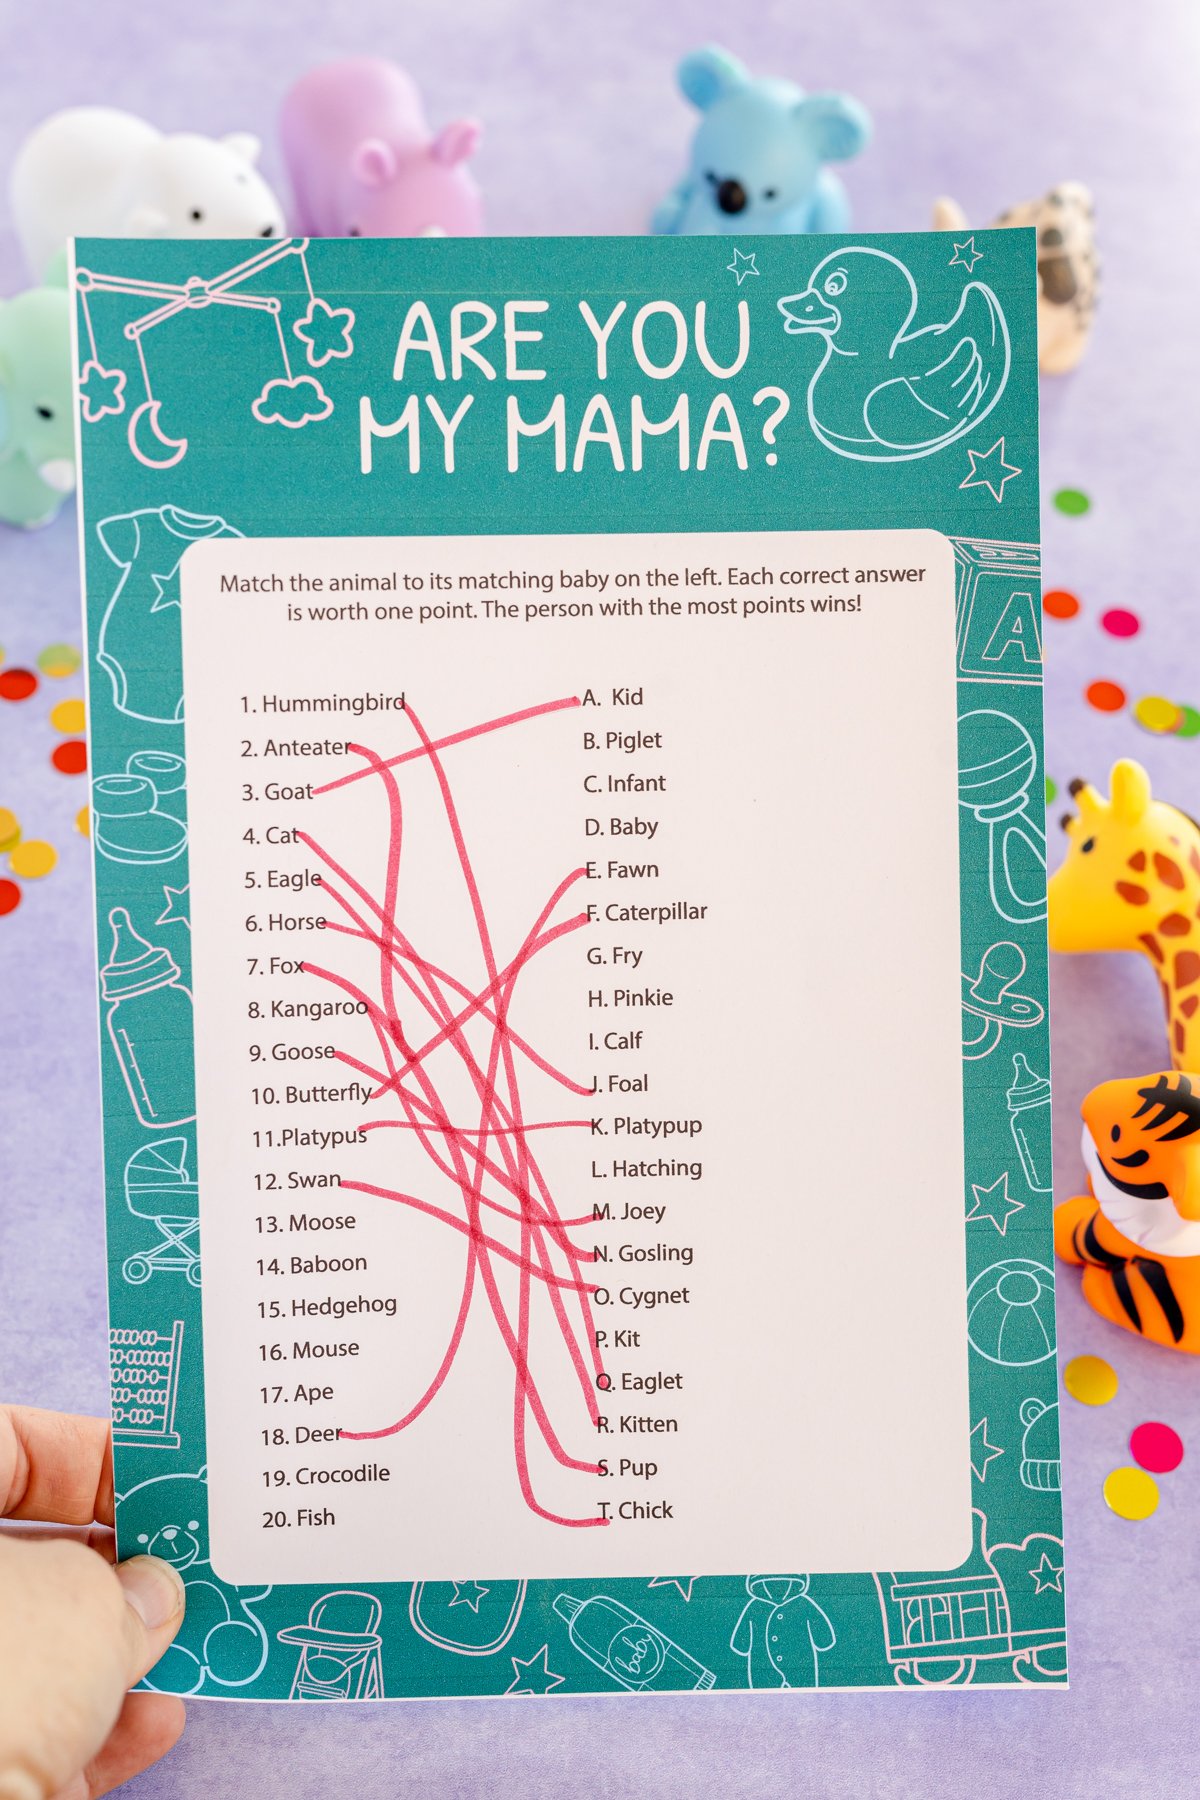 baby animal matching game with answers drawn in